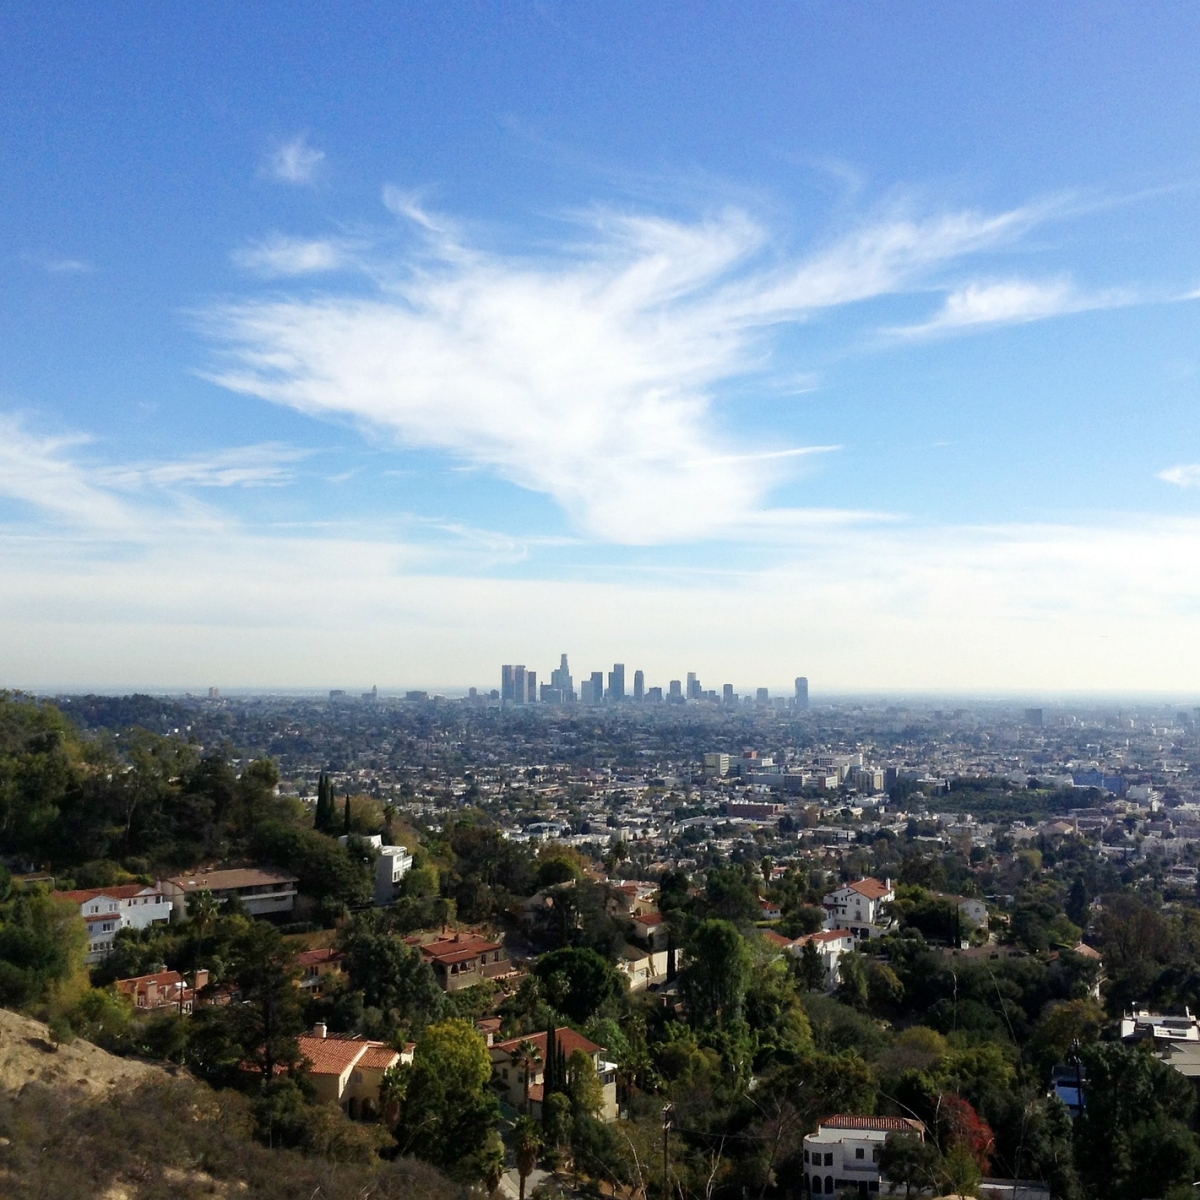 Los Angeles skyline in the distance